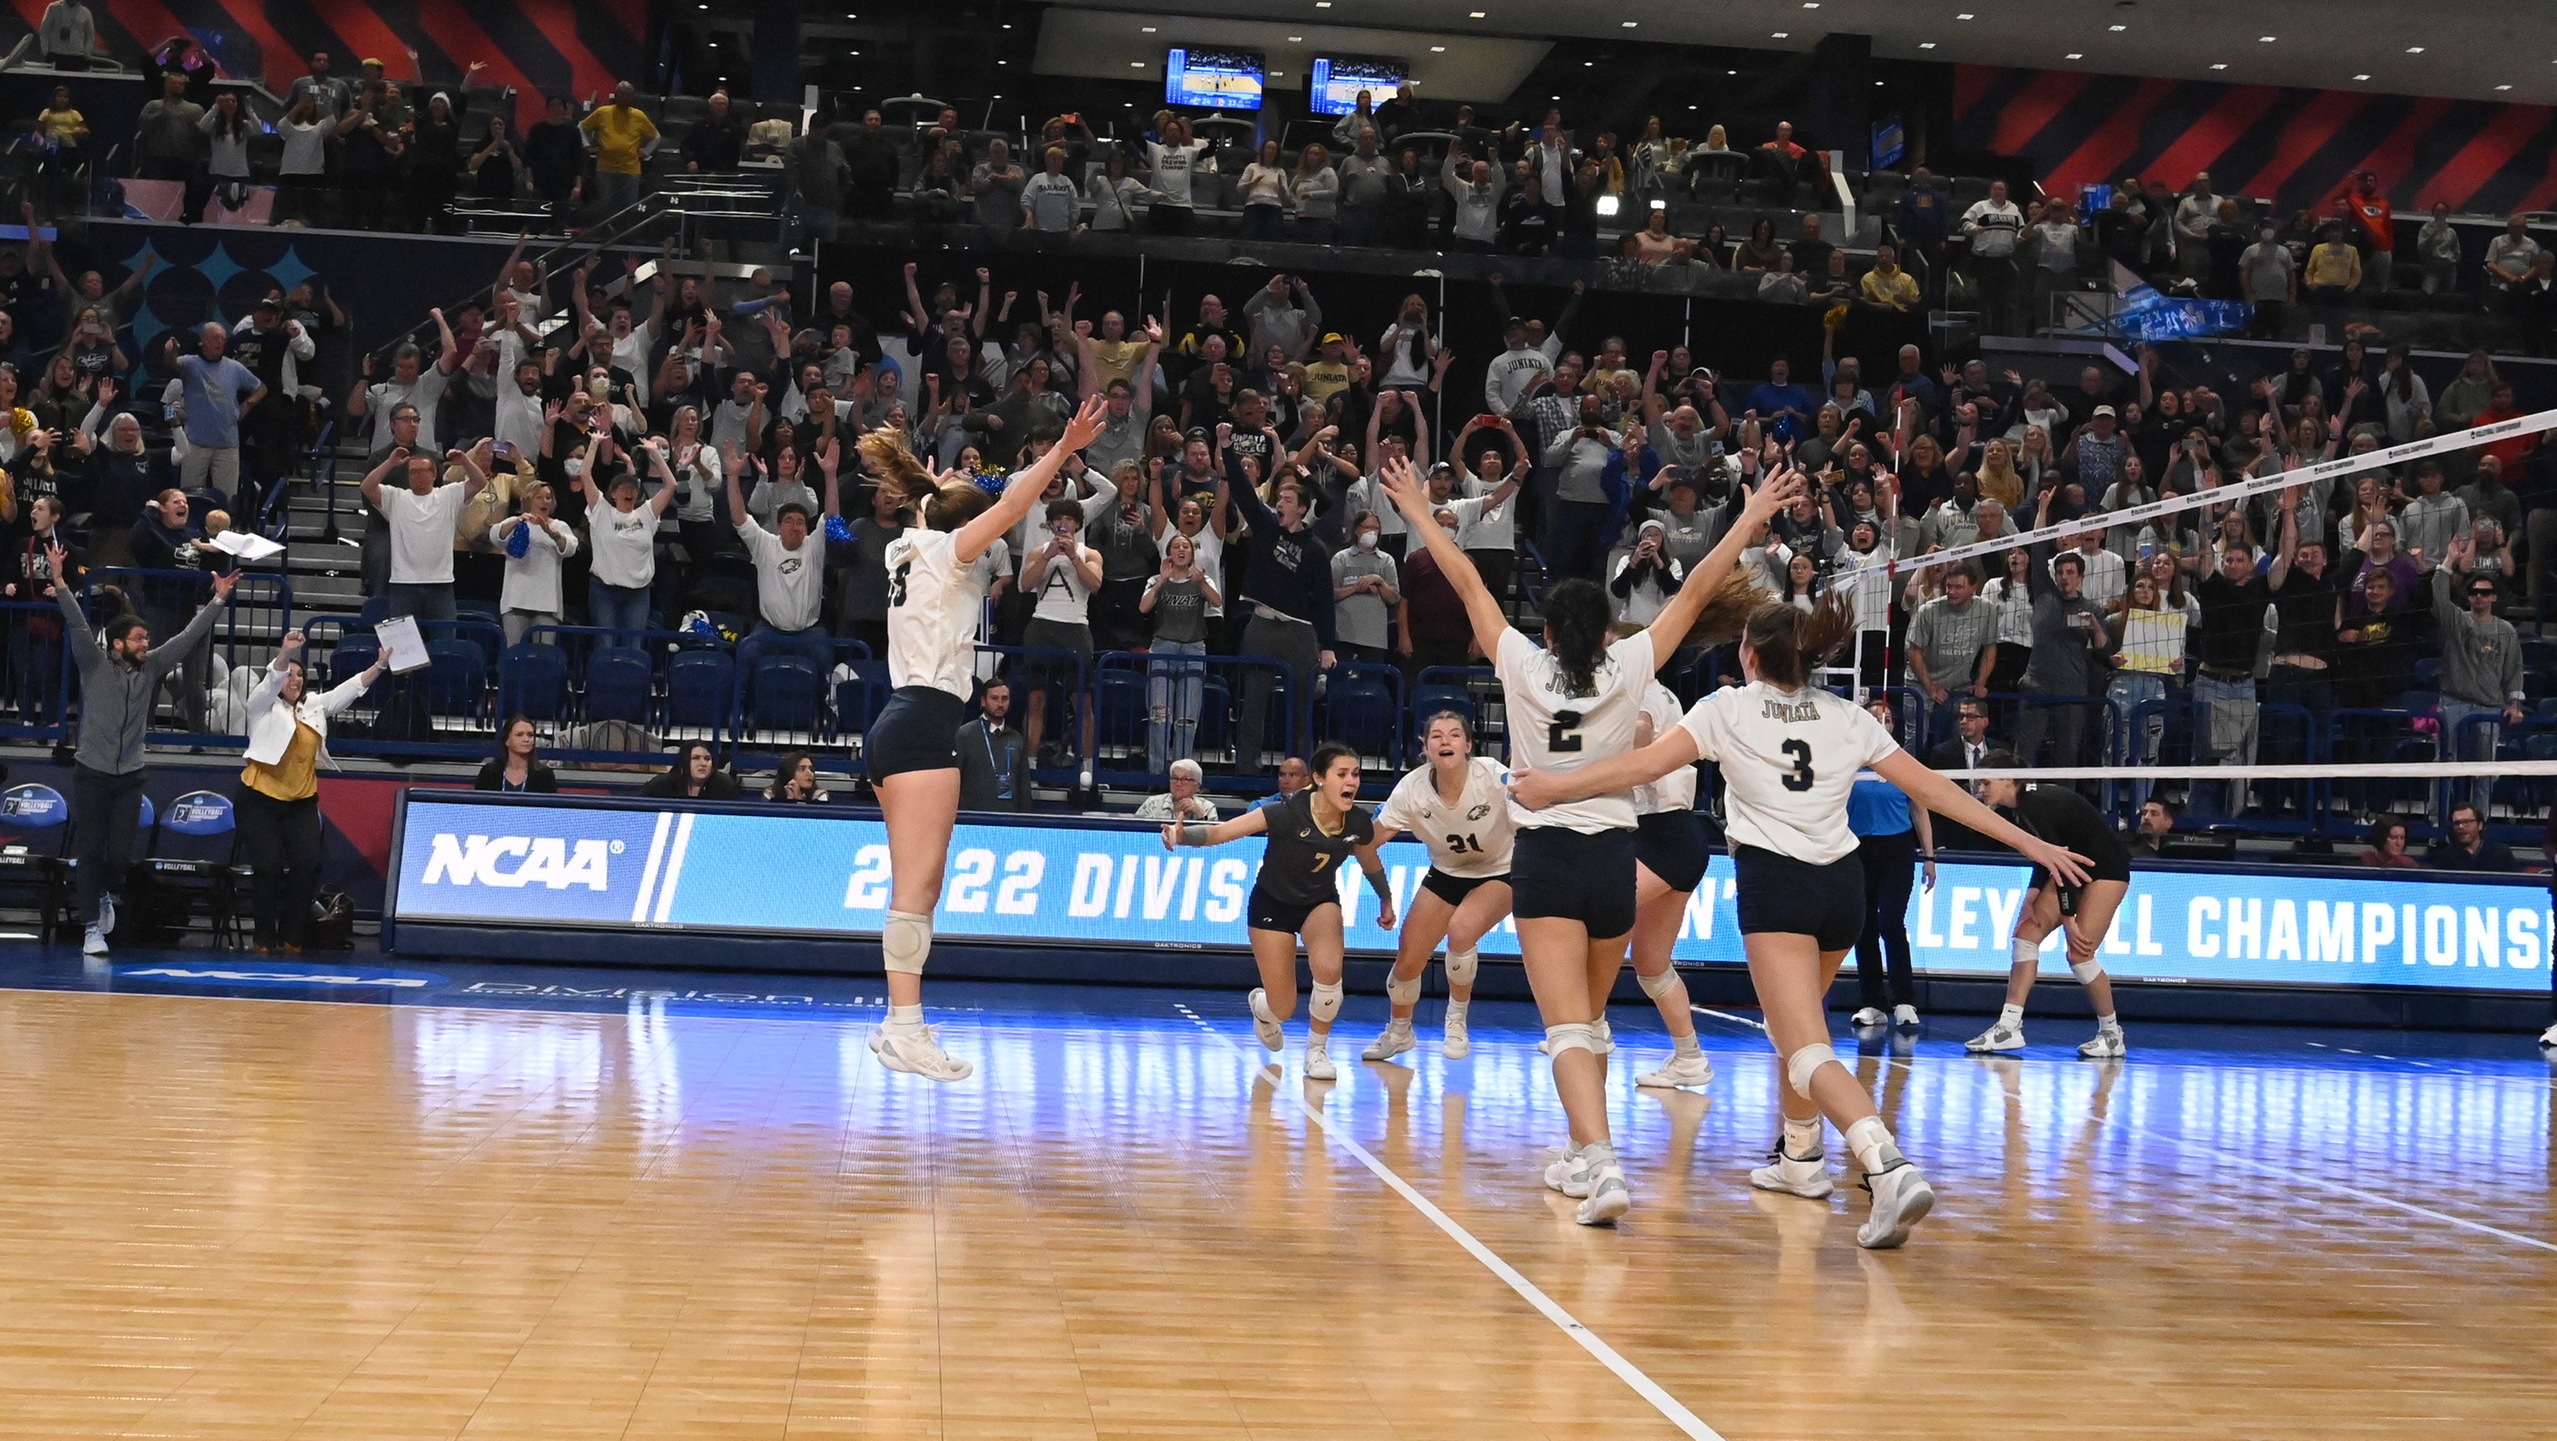 Watch the Women's Volleyball National Championship Celebration Tomorrow at Noon